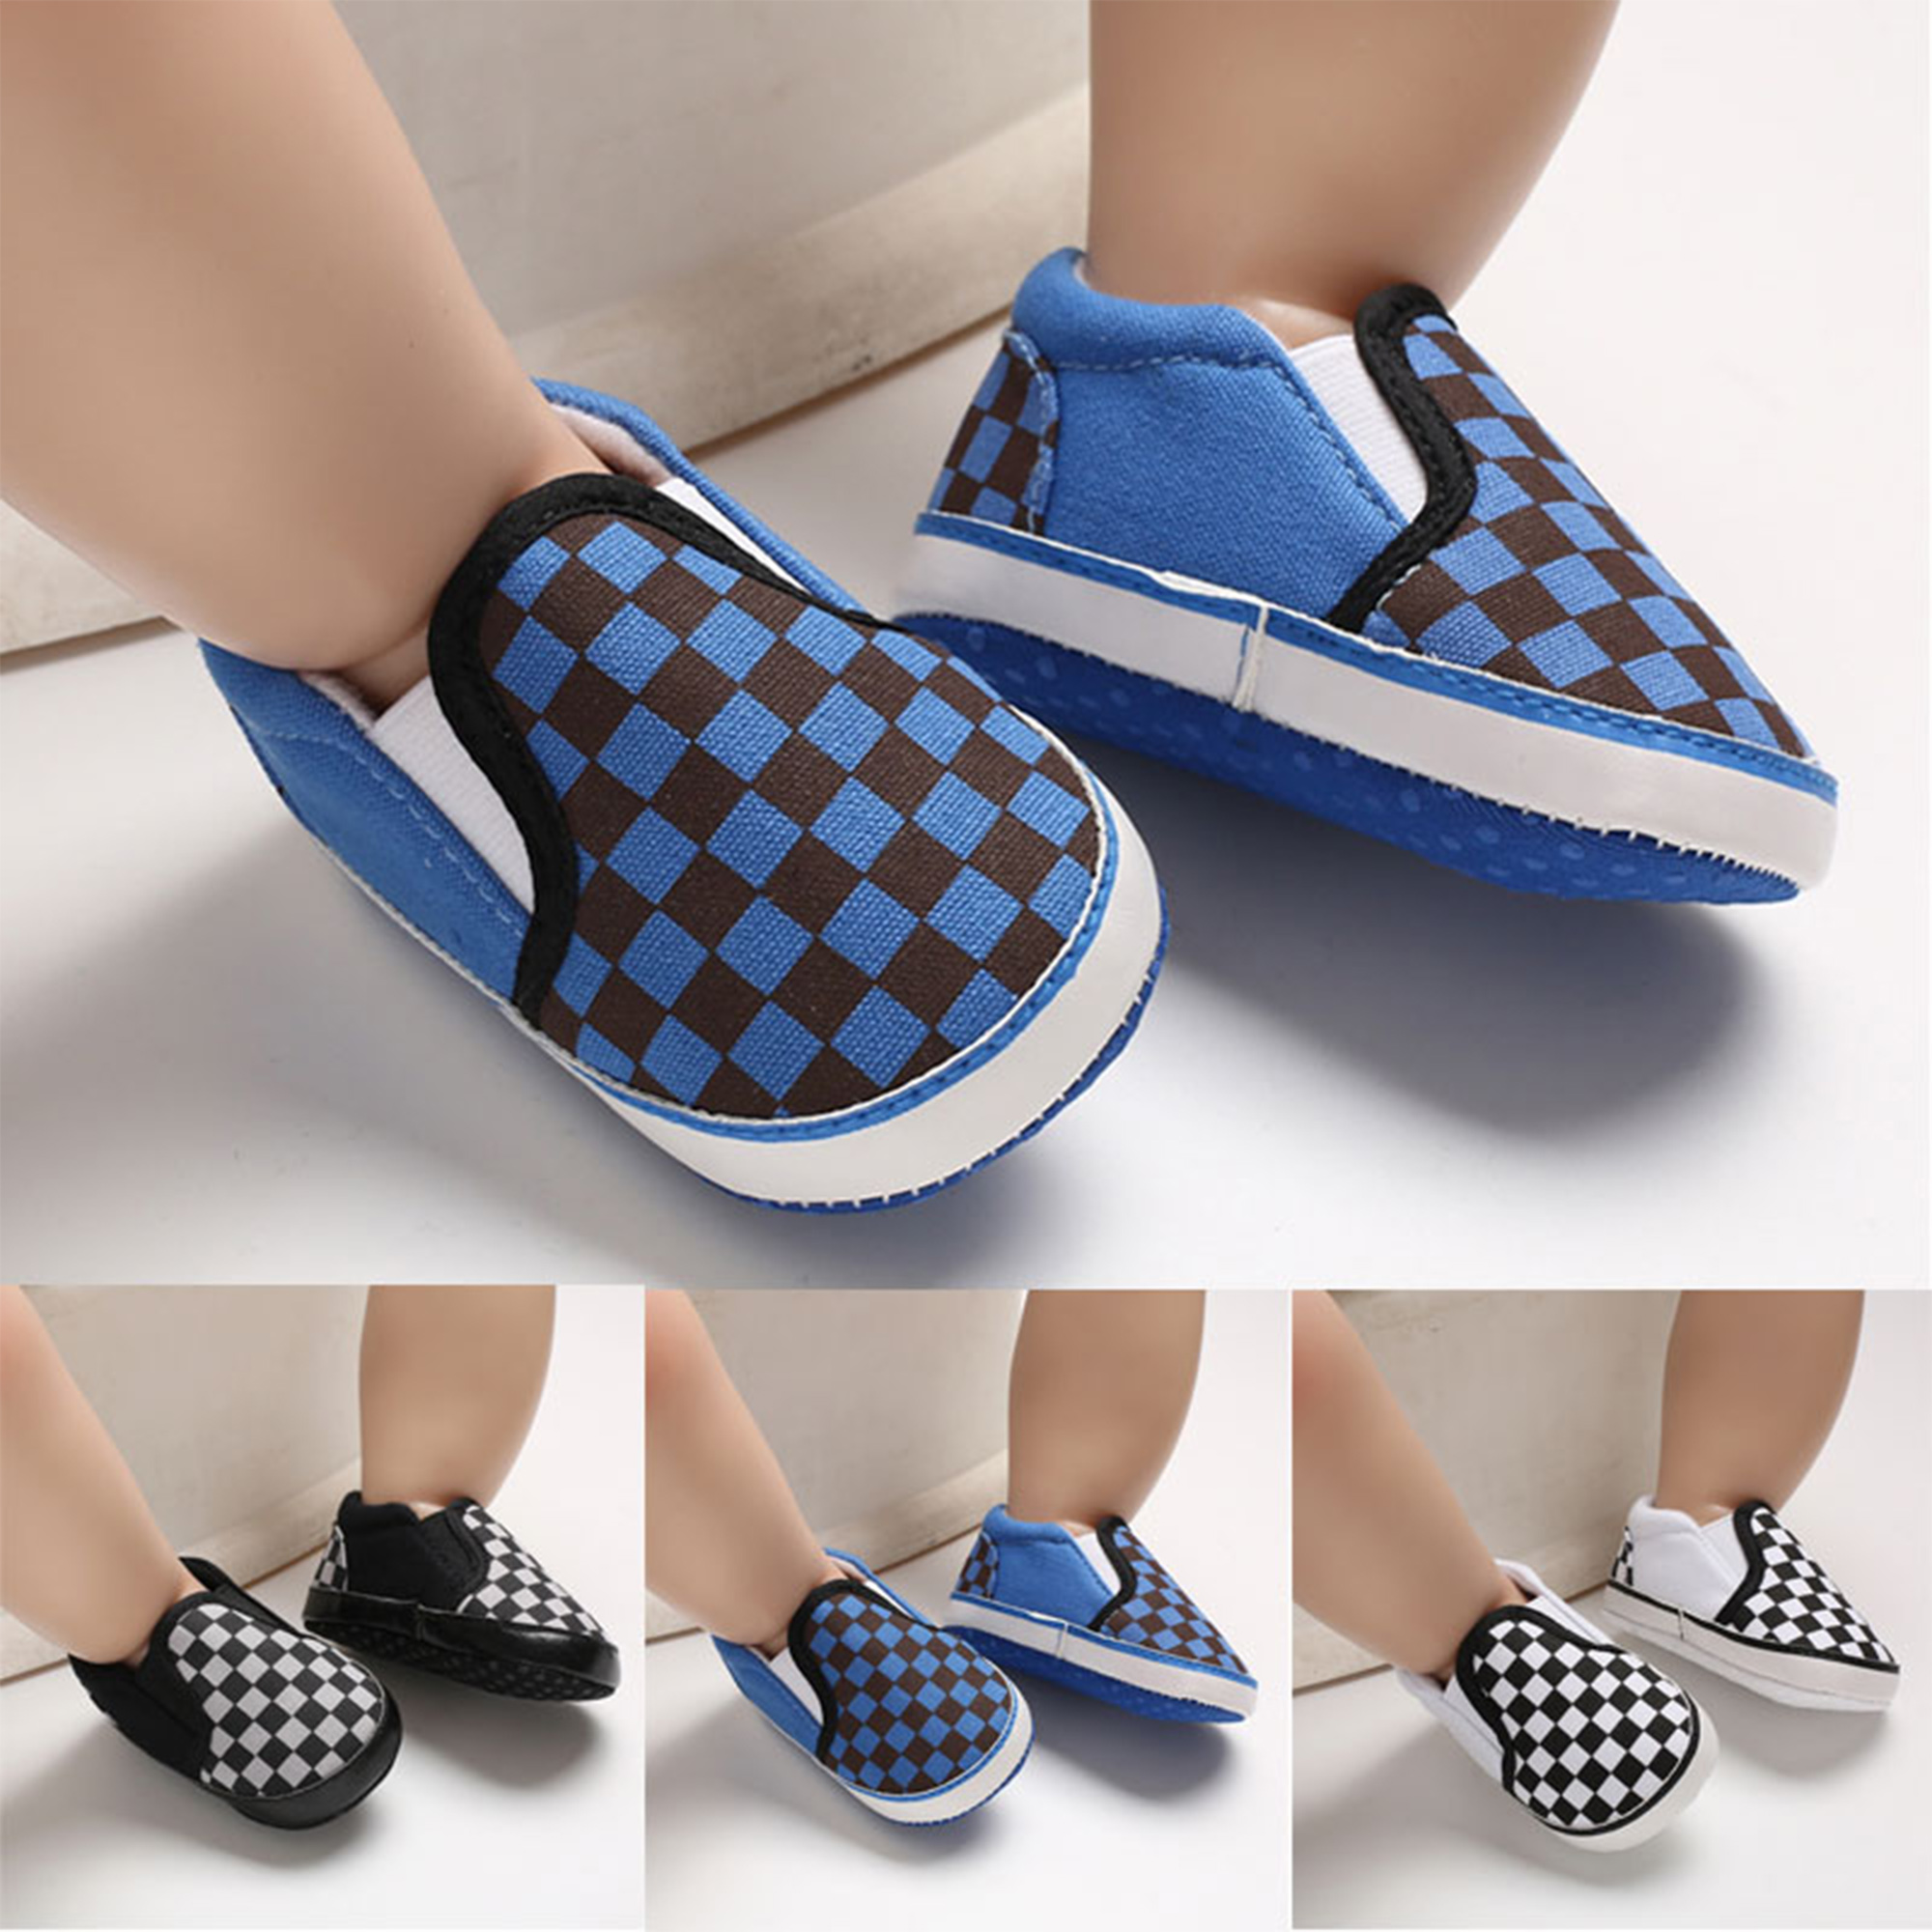 MERSARIPHY Newborn Baby Girls Sneaker Soft Sole Casual Canvas Shoes - image 4 of 5